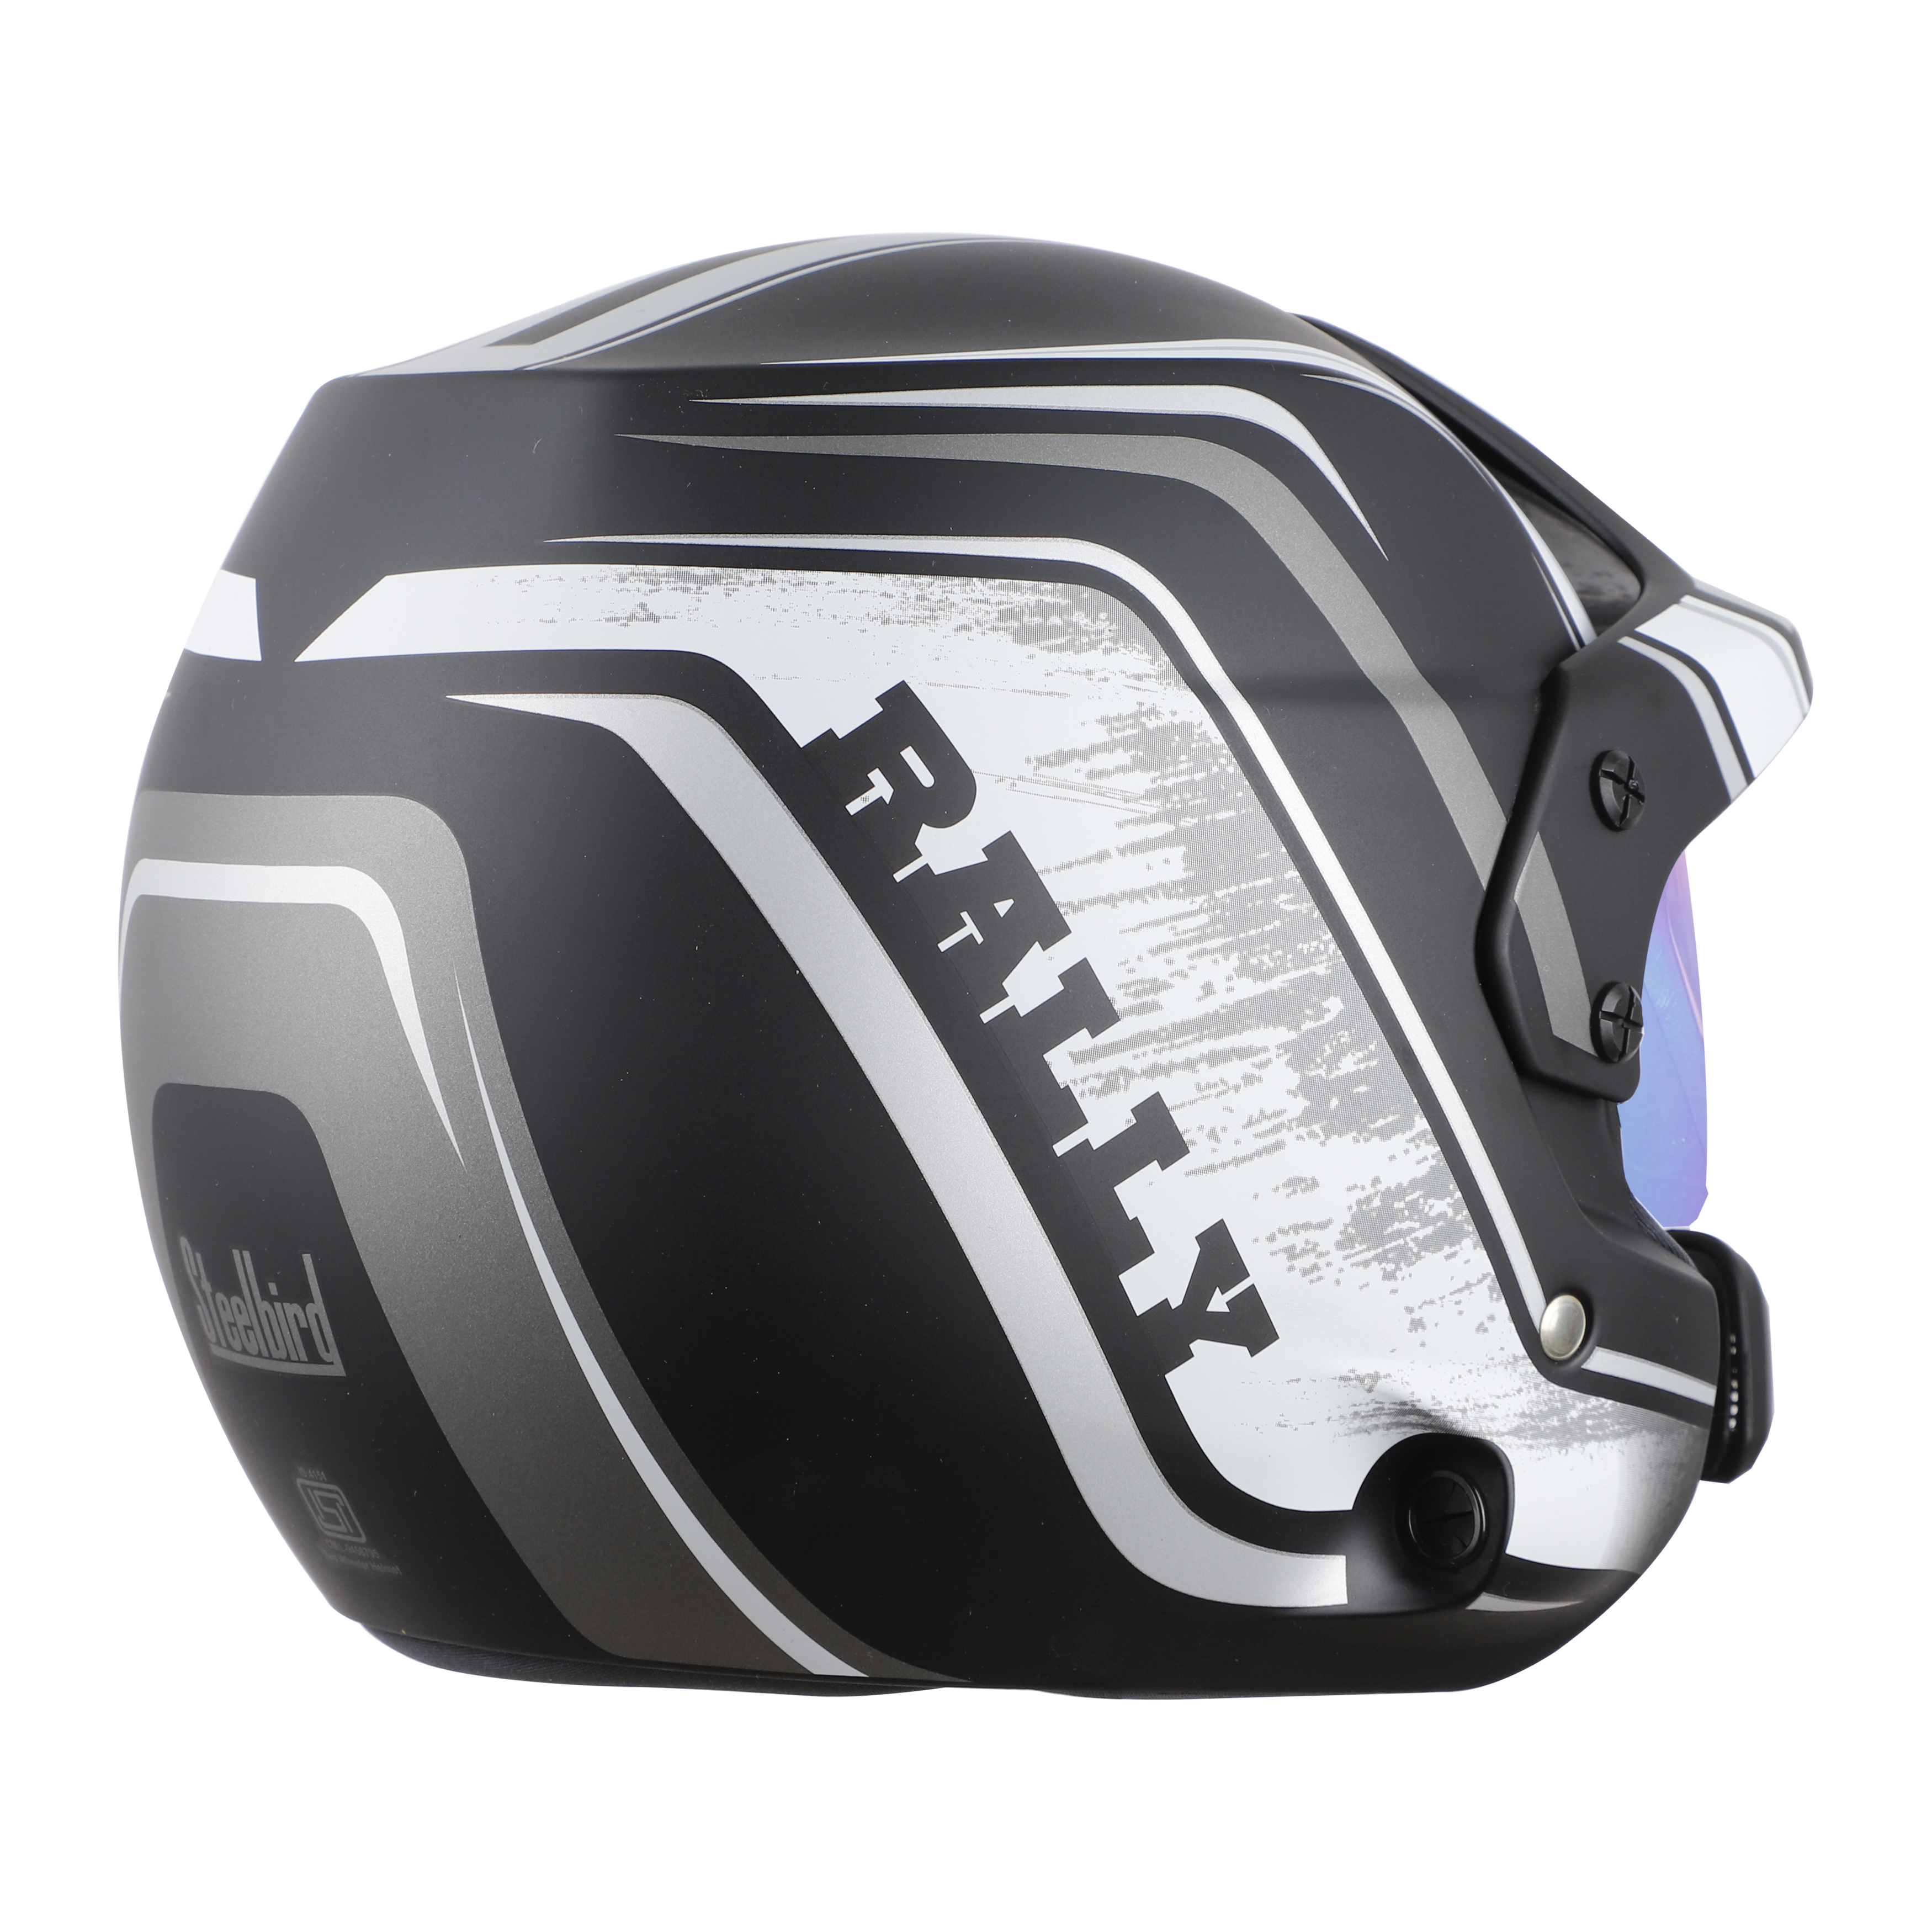 SB-51 RALLY RUT GLOSSY BLACK WITH GREY ( FITTED WITH CLEAR VISOR EXTRA CHROME RAINBOW VISOR FREE)